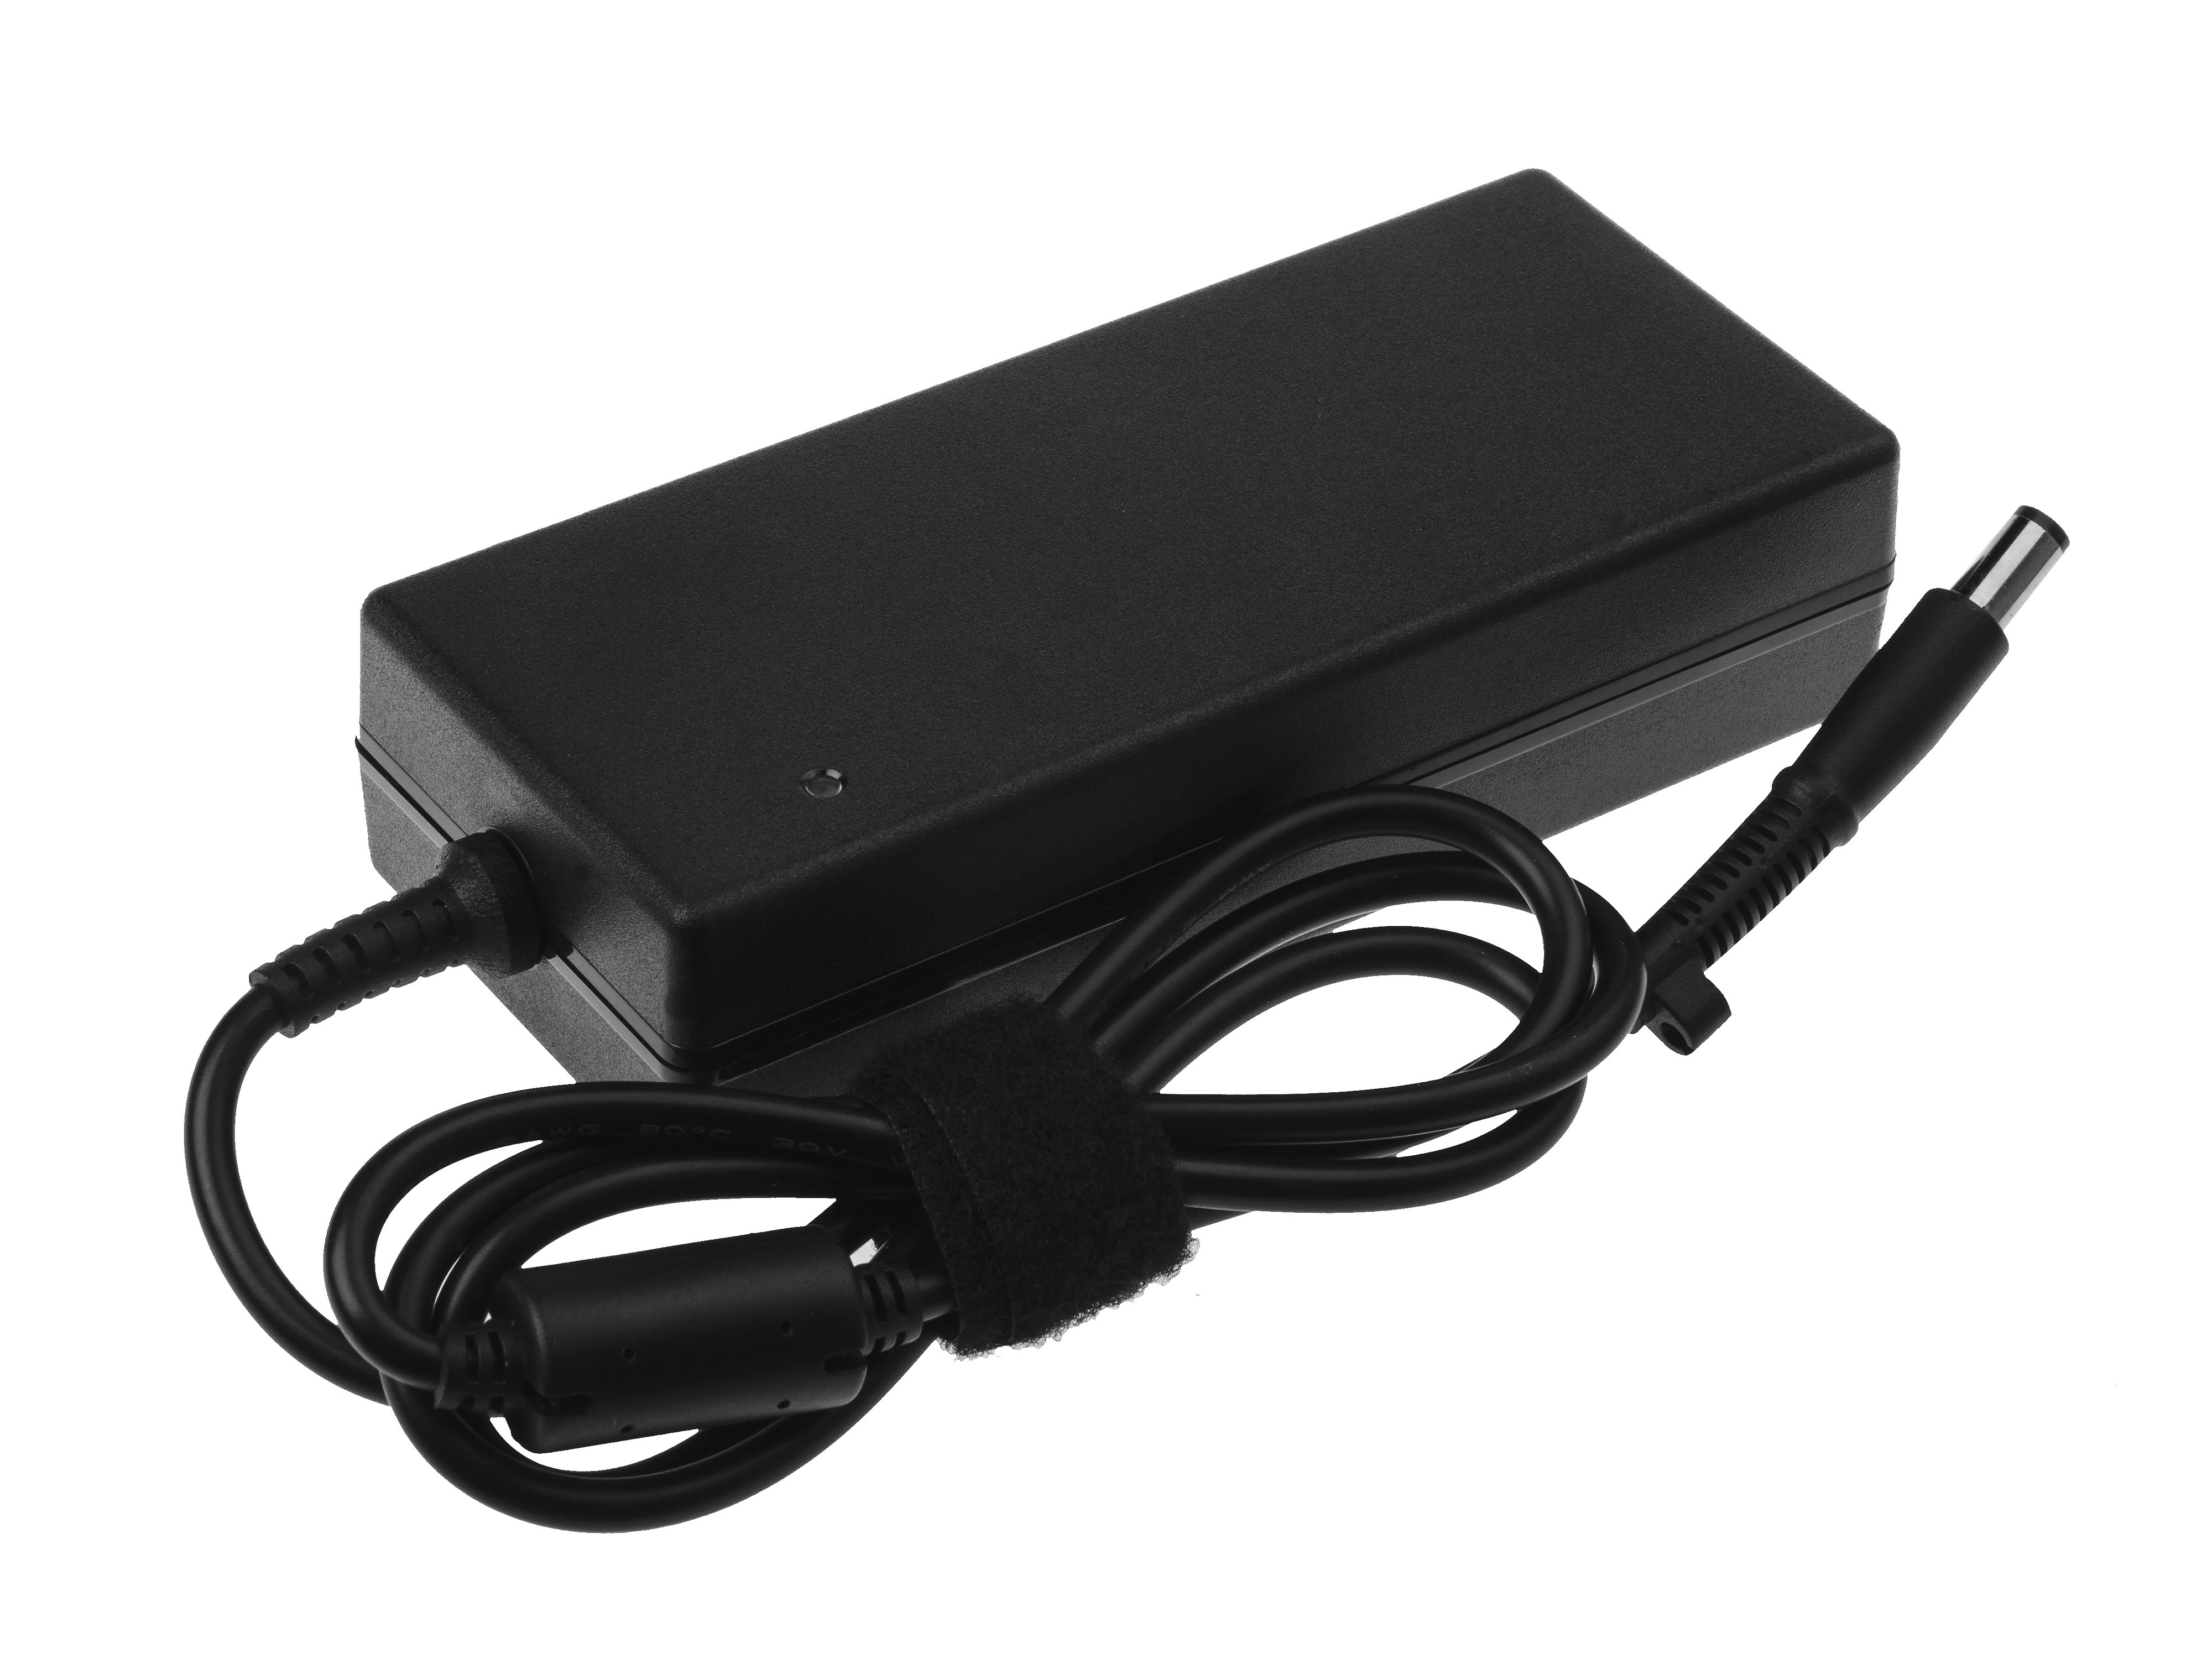 Green Cell PRO lader / AC Adapter til HP Compaq 6710b - 19V 7.1A 135W